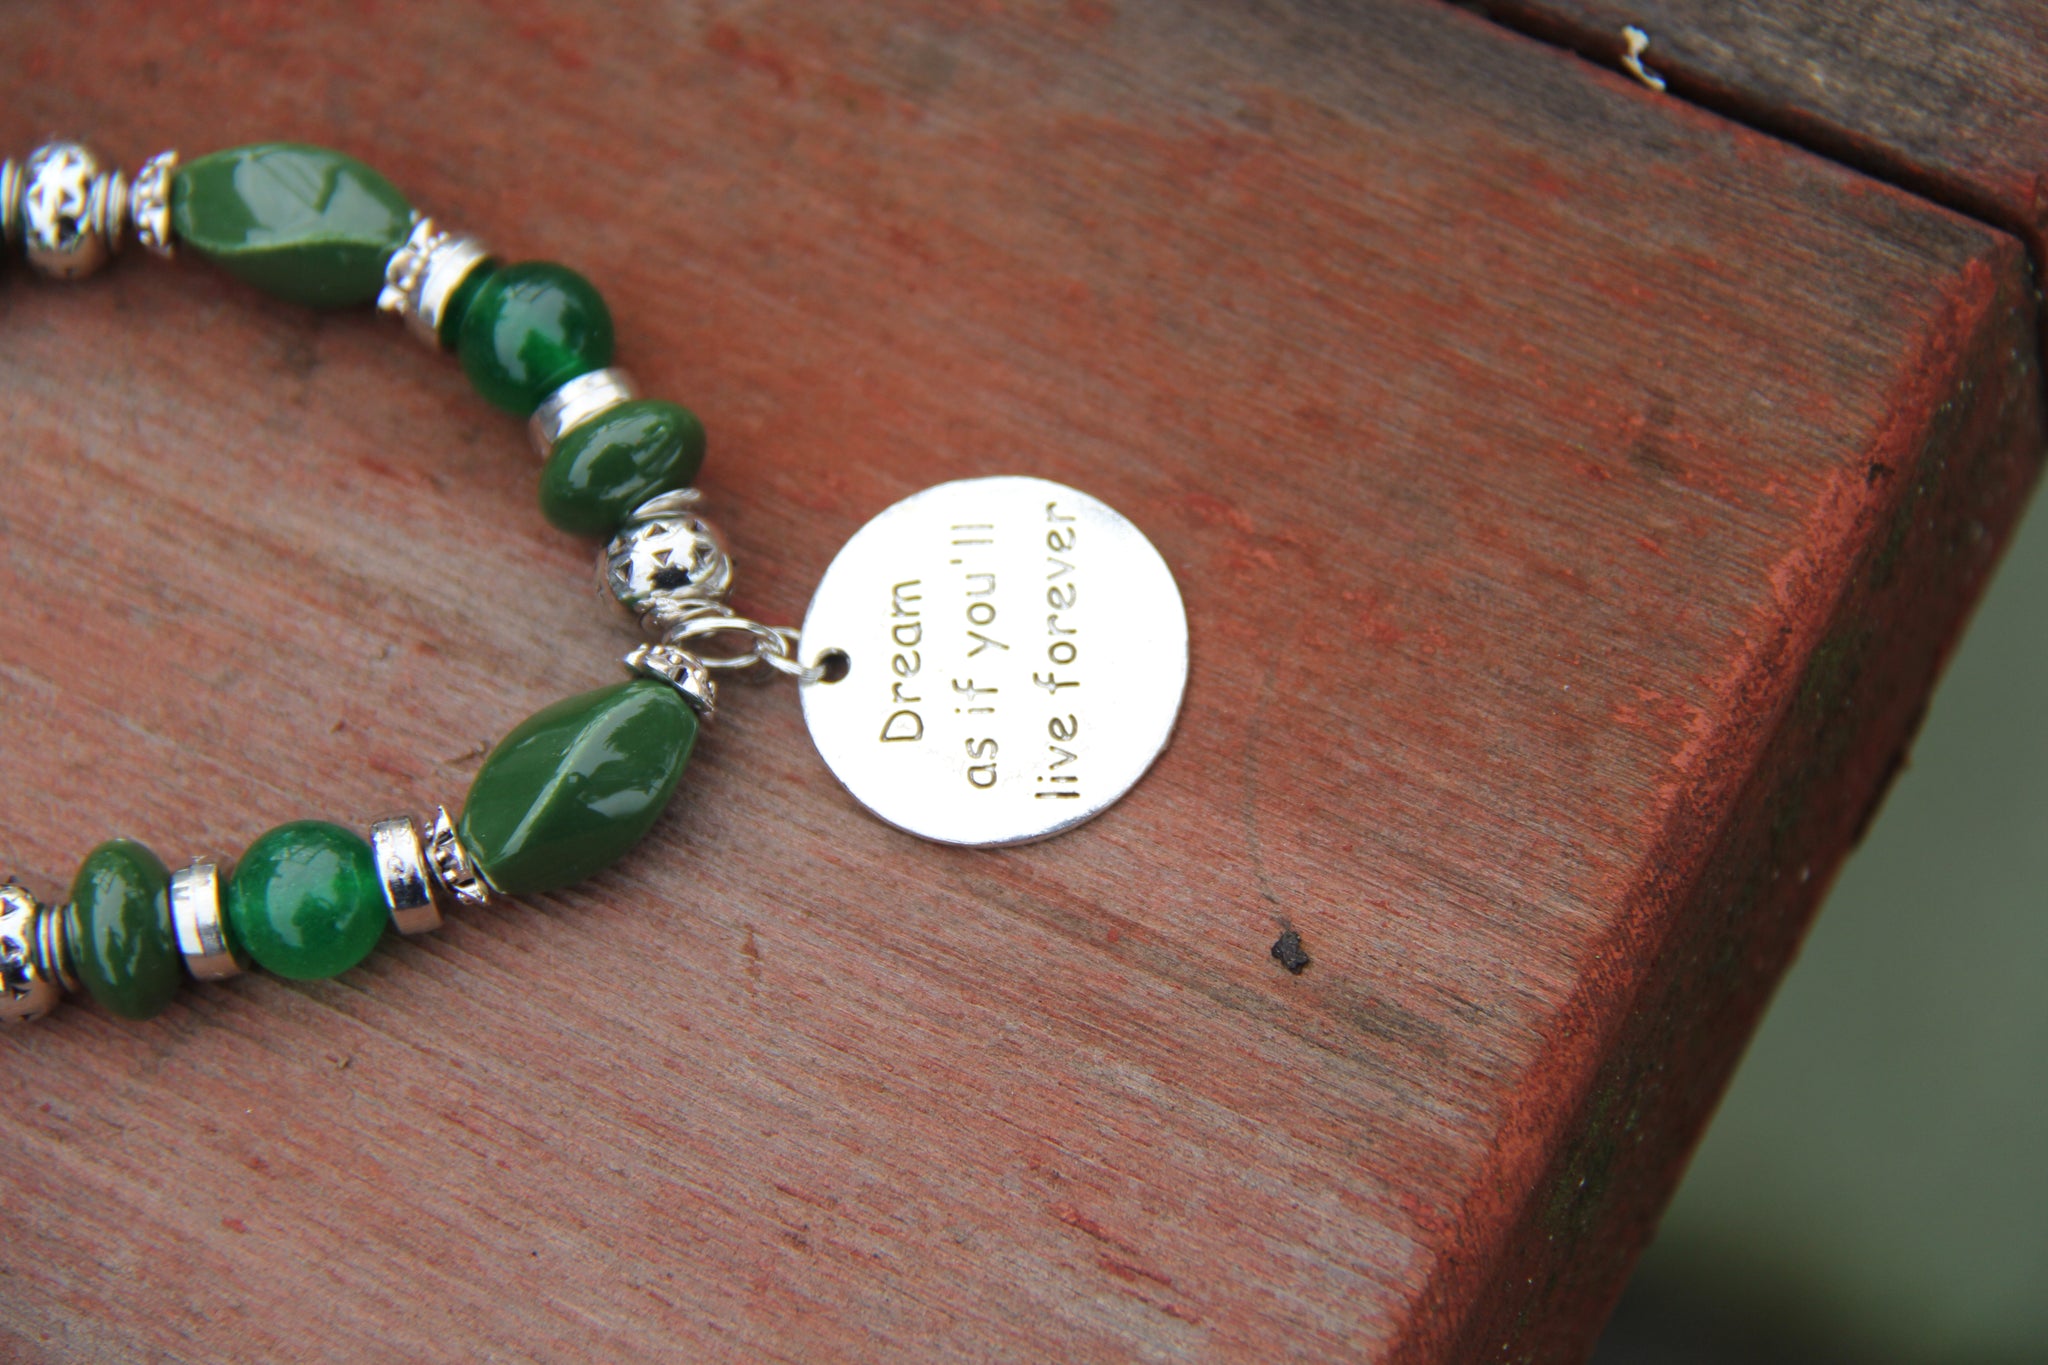 Green beads bottle bracelet with "Dream as if you'll live for ever" charm.